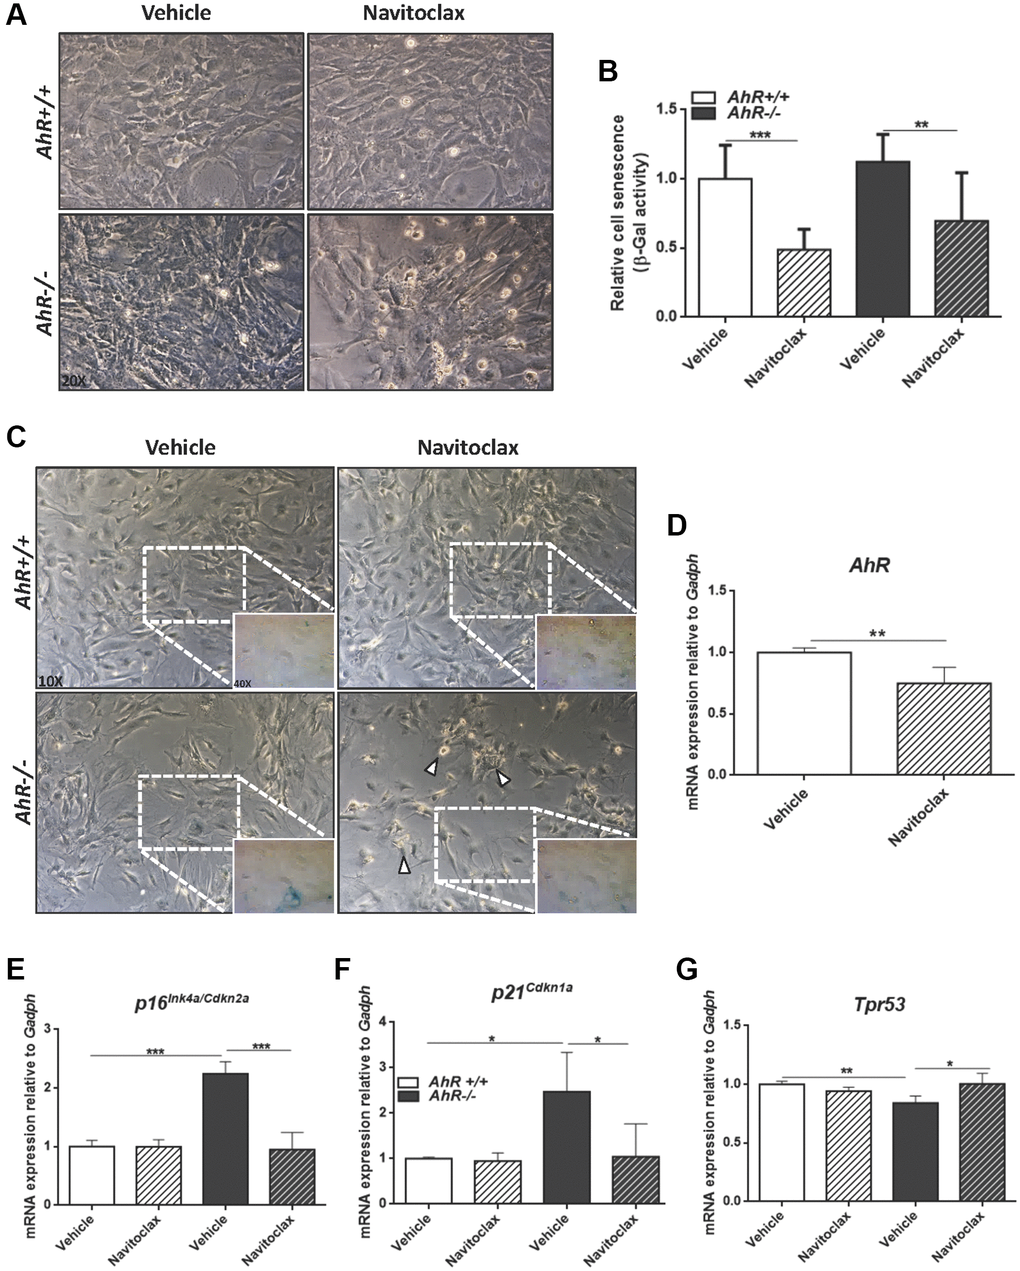 Senolytic agent Navitoclax restores wild-type mRNA levels of senescence driver genes in AhR−/− MEFs. Embryonic fibroblasts at P4 or P5 were treated with vehicle or 10 μM Navitoclax for 48 h. (A) Bright-field microscopy of AhR+/+ and AhR−/− MEFs untreated or treated with Navitoclax. (B) Cell senescence measured as percentage of SA-β-Gal activity in MEF cells of both genotypes. SA-β-Gal activity was analyzed by FACS using the β-galactosidase fluorescent substrate C12FDG. Results are normalized to vehicle-treated wild-type MEFs. (C) X-Gal staining in untreated and Navitoclax-treated AhR+/+ and AhR−/− MEFs. (D) AhR mRNA expression was determined by RT-qPCR in both experimental conditions using the oligonucleotides indicated in Supplementary Table 1. (E–G) mRNA expression of senescence driver genes p16Ink4a (E), p21Cip1 (F) and Trp53 (G) was determined in AhR+/+ and AhR−/− MEFs by RT-qPCR using oligonucleotides indicated in Supplementary Table 1. Gapdh was used to normalize target gene expression (△Ct) and 2−△△Ct to calculate changes in mRNA levels with respect to wild type or untreated conditions. Data are shown as mean + SD (*P **P ***P 